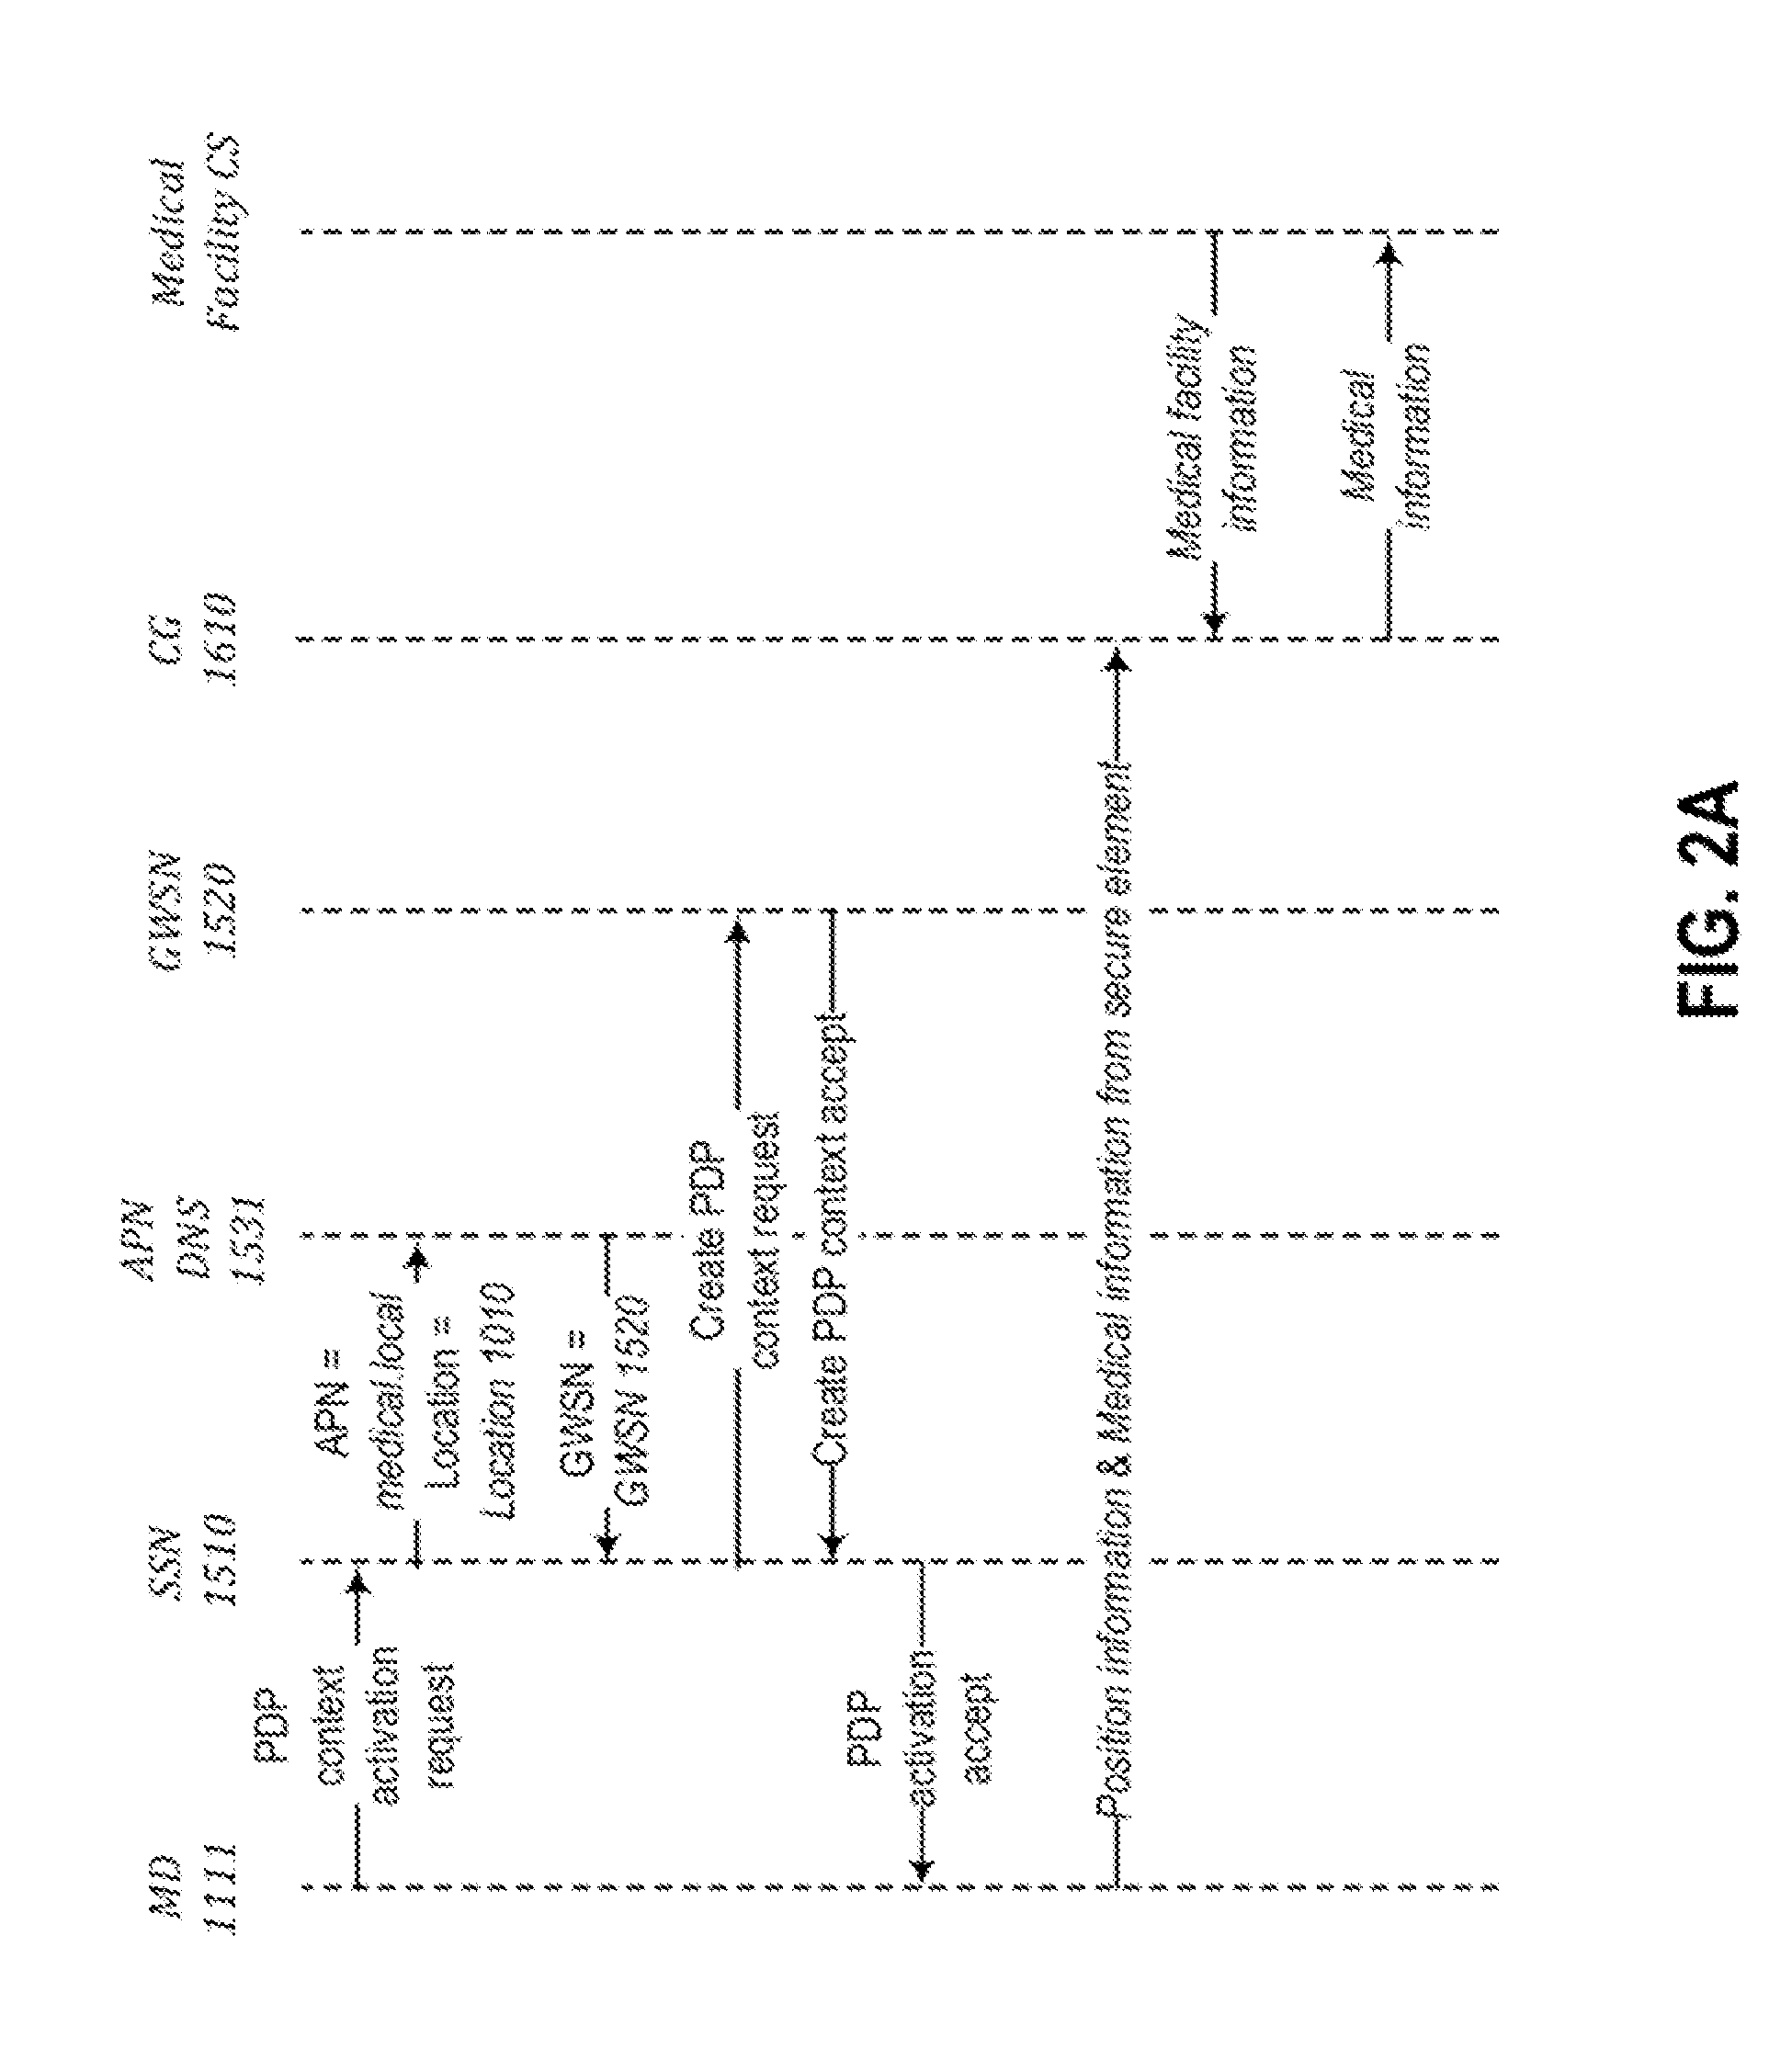 Mobile Device Supported Medical Information Services